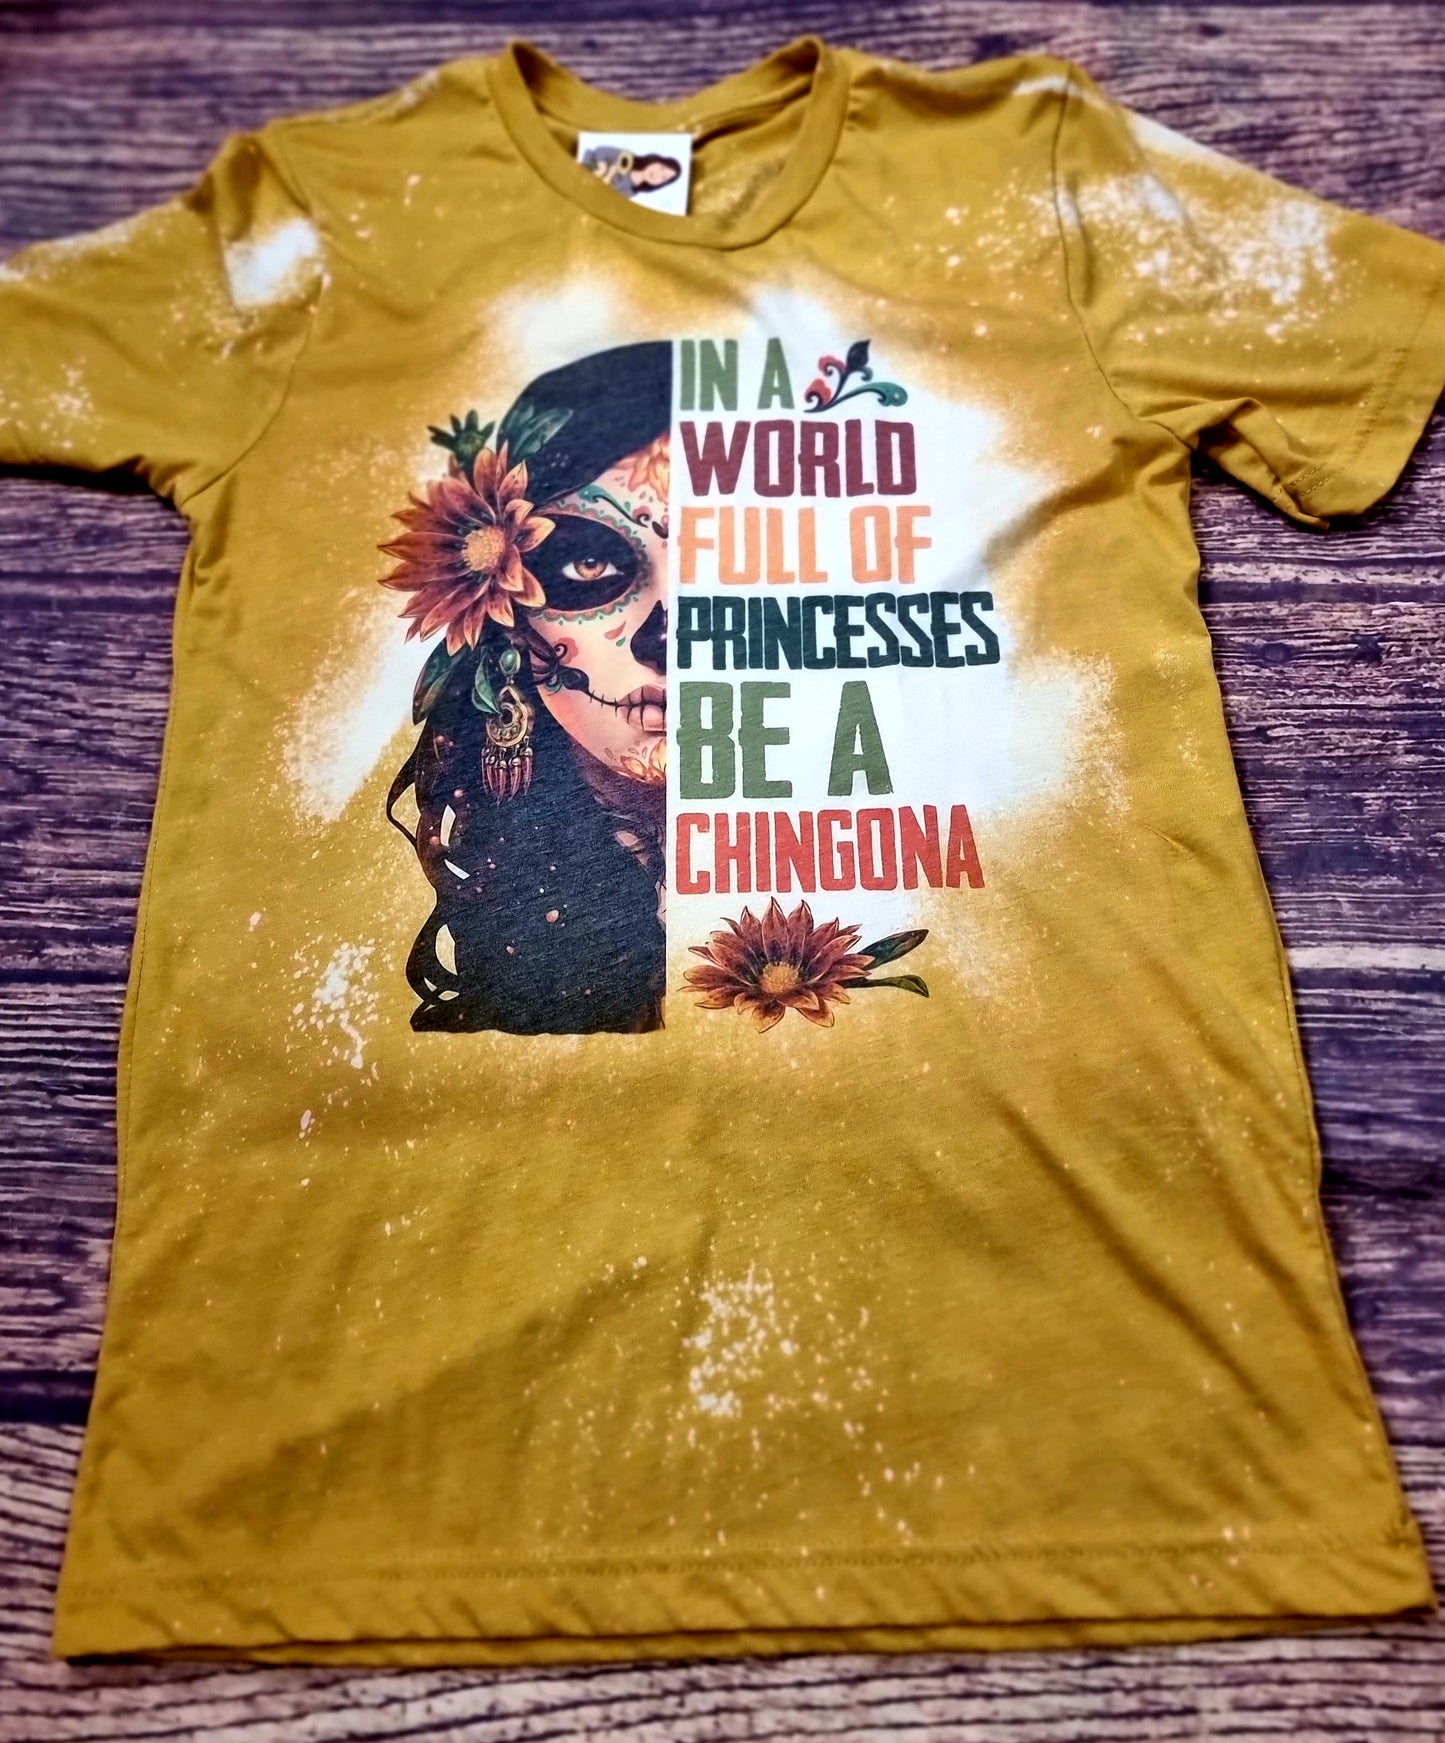 In A World of Princesses Be A Chingona